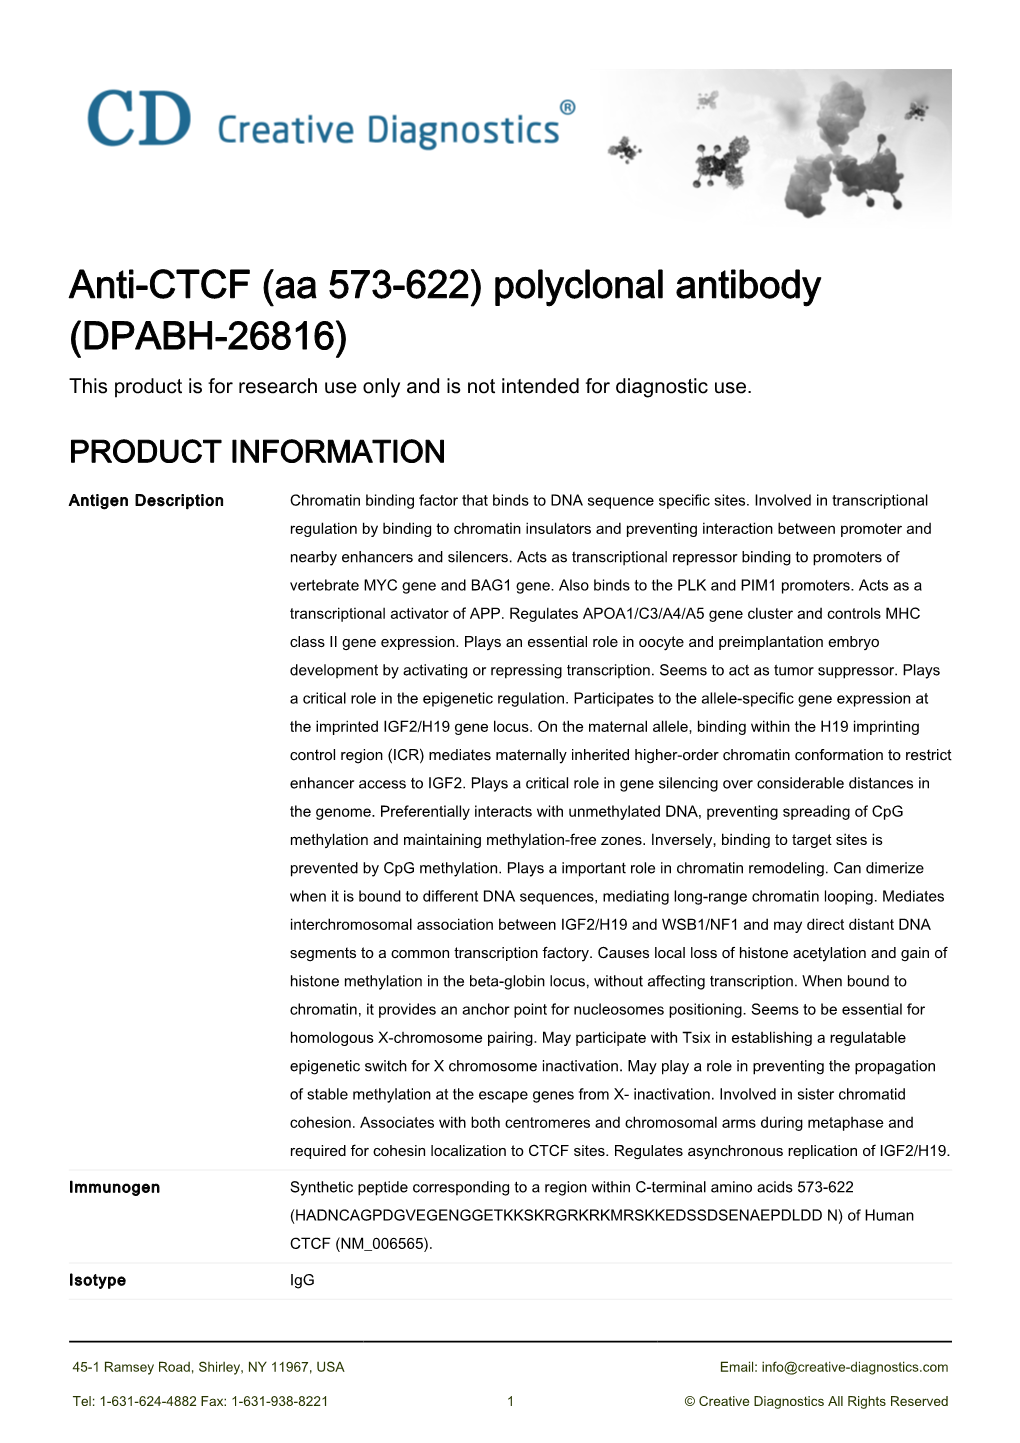 Anti-CTCF (Aa 573-622) Polyclonal Antibody (DPABH-26816) This Product Is for Research Use Only and Is Not Intended for Diagnostic Use